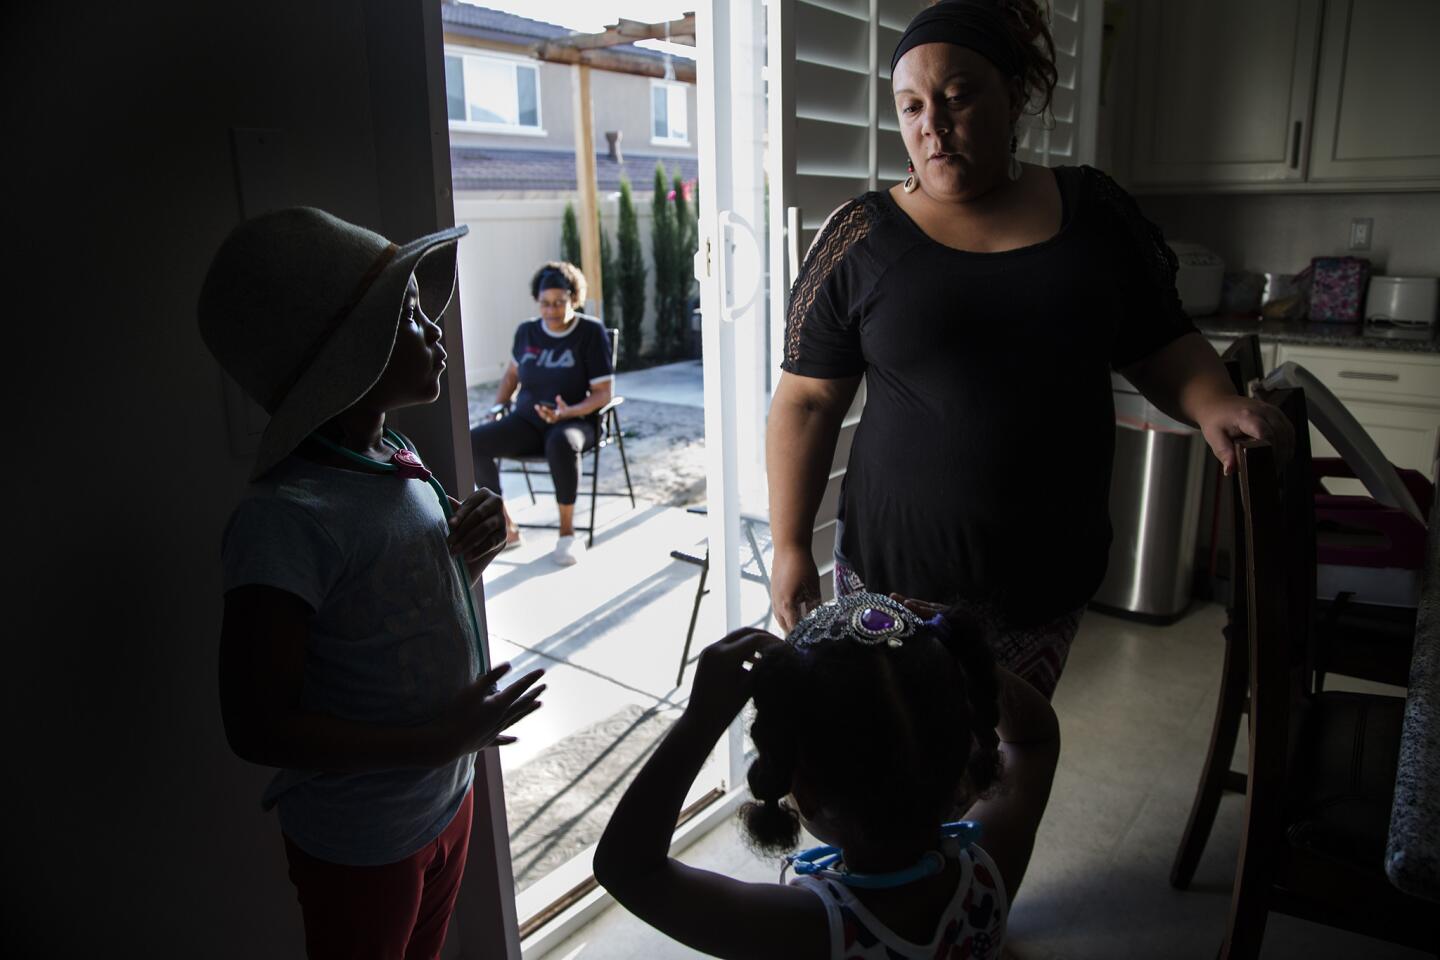 House manager Erica Wilson spends time with Leana Wilson, 6, left, and Brooklyn Jackson, 3, before dinner at transitional housing they share with five in Eastvale. Three years after voters passed Proposition 47, California is preparing to funnel $35.6 million in prison savings to programs for mental health, substance abuse and rehabilitation.